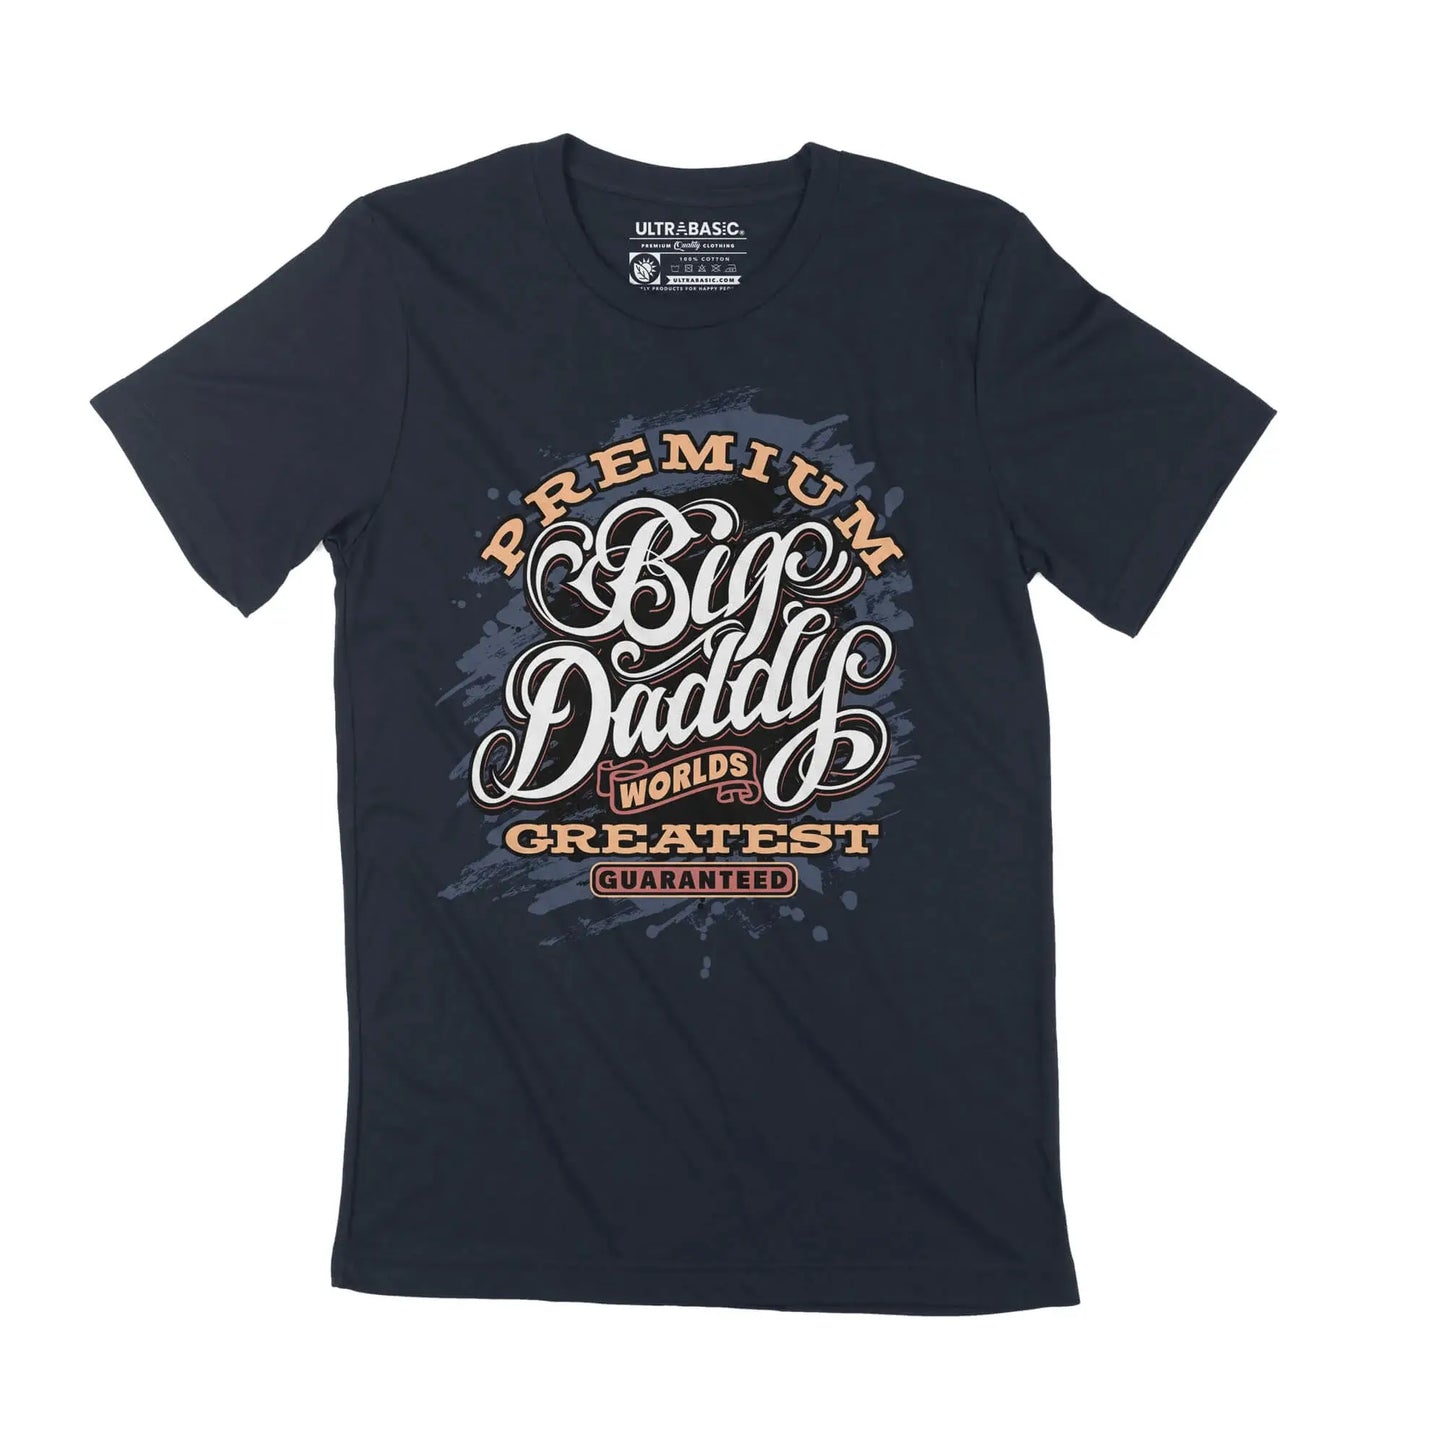 Men's Graphic T-Shirt Premium Big Daddy Worlds Eco-Friendly Limited Edition Short Sleeve Tee-Shirt Vintage Birthday Gift Novelty